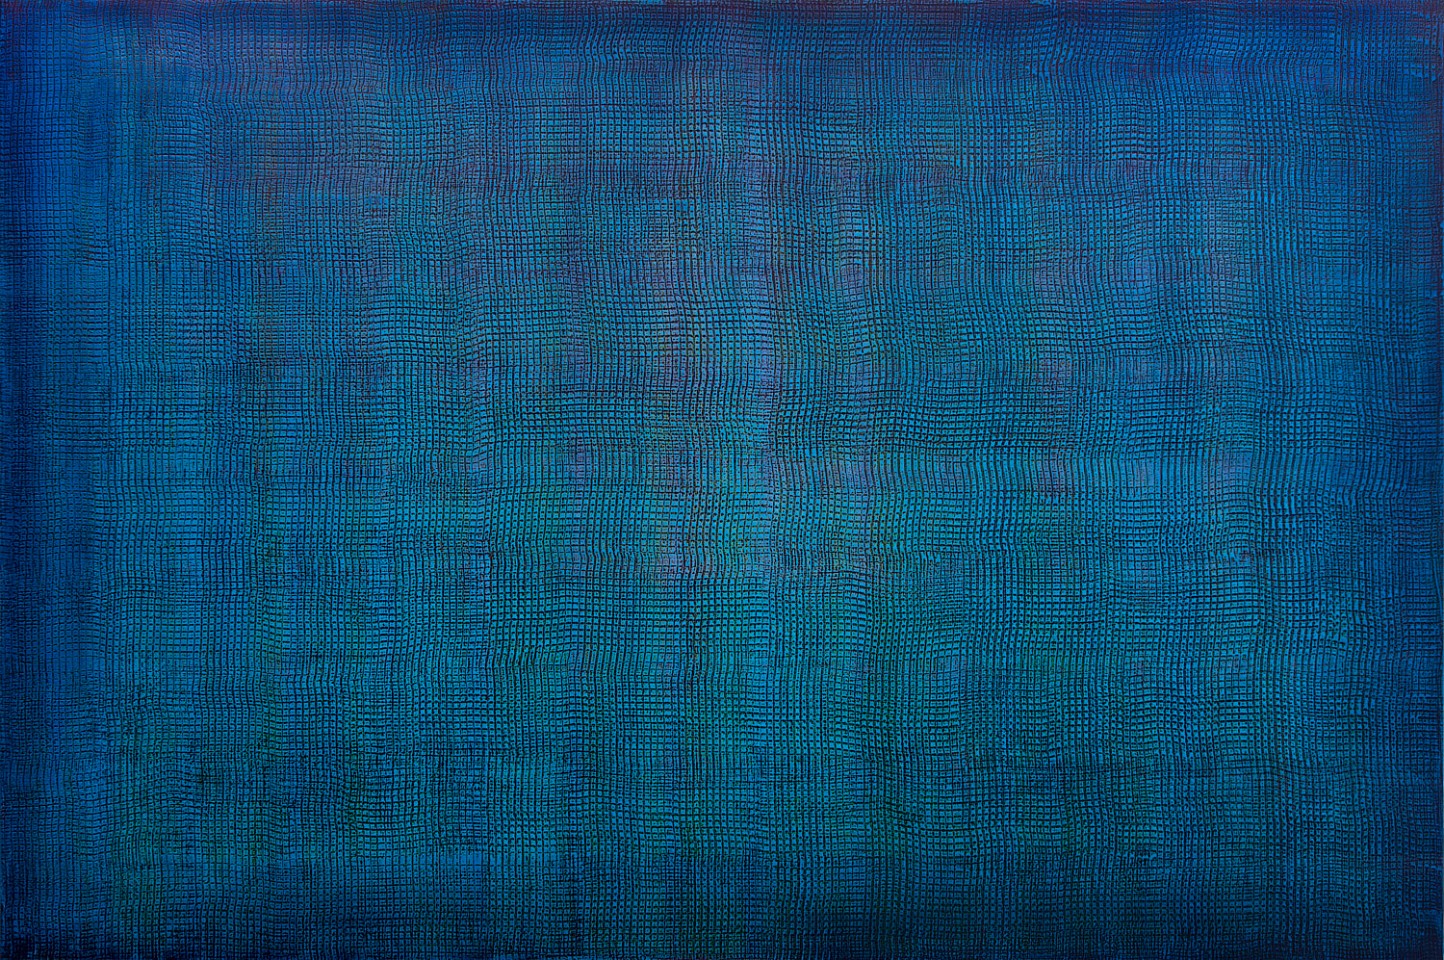 Karin Schaefer
Persian Gulf, 2016
SCHAE044
oil on panel, 40 x 60 inches